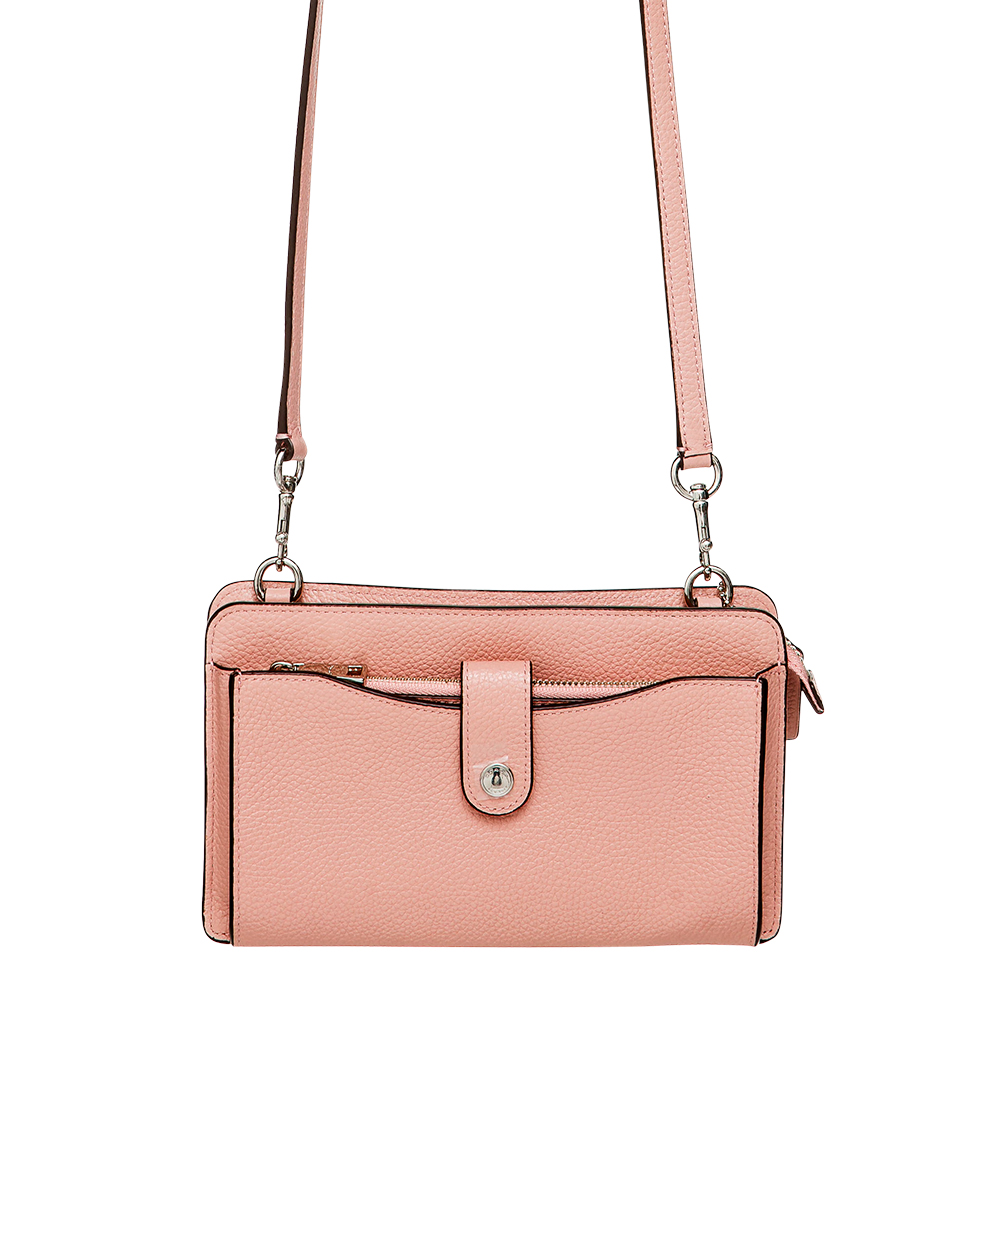 Coach bag, $360, from T by DFS Galleria